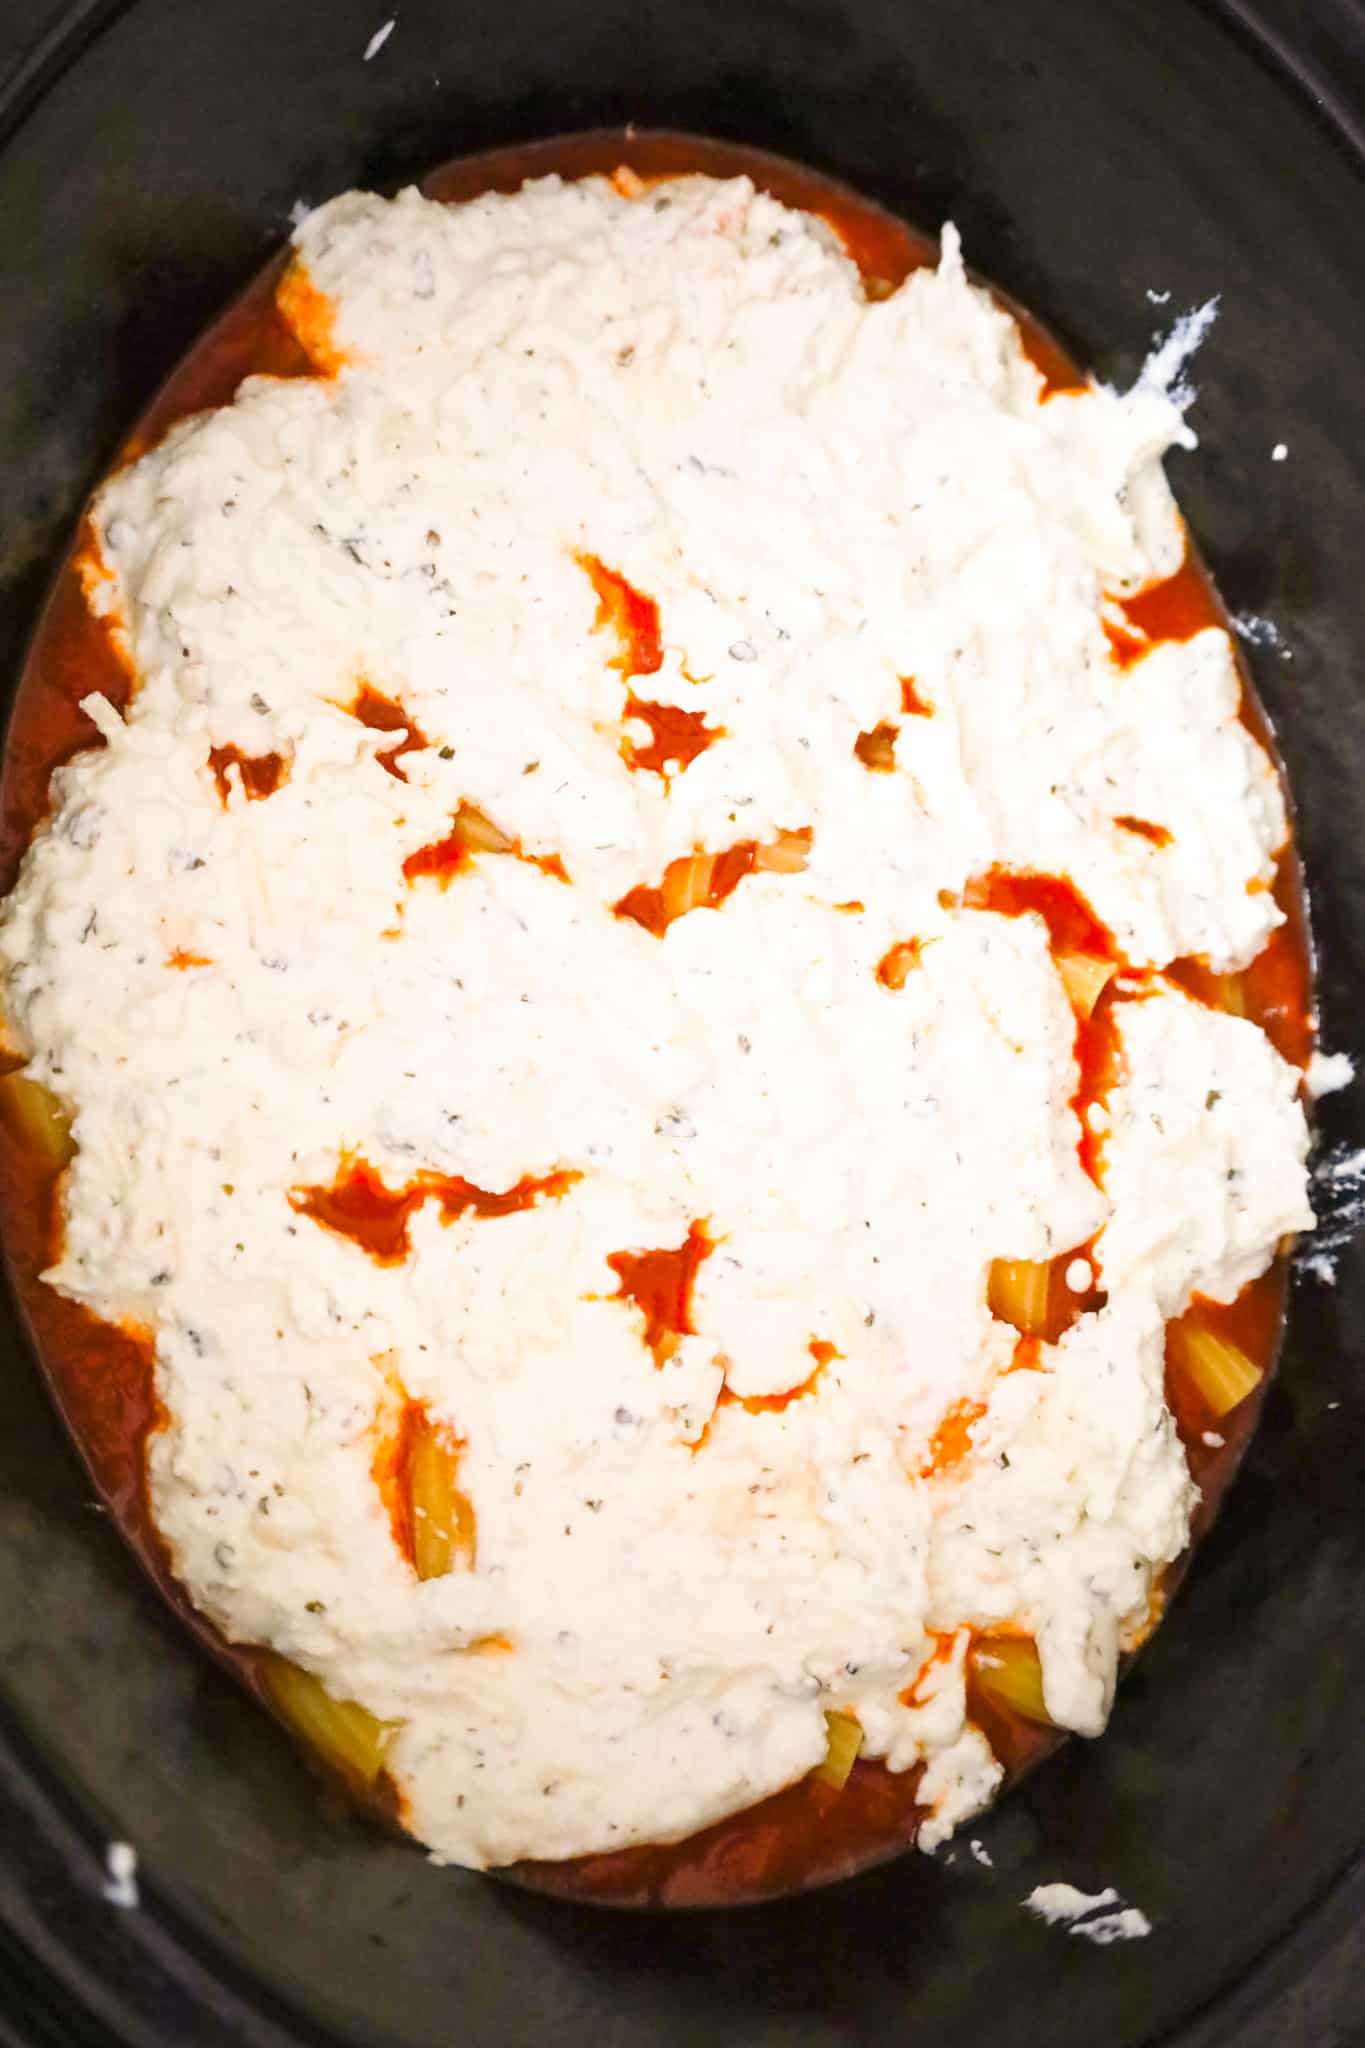 ricotta and sour cream mixture on top of marinara sauce in a crock pot